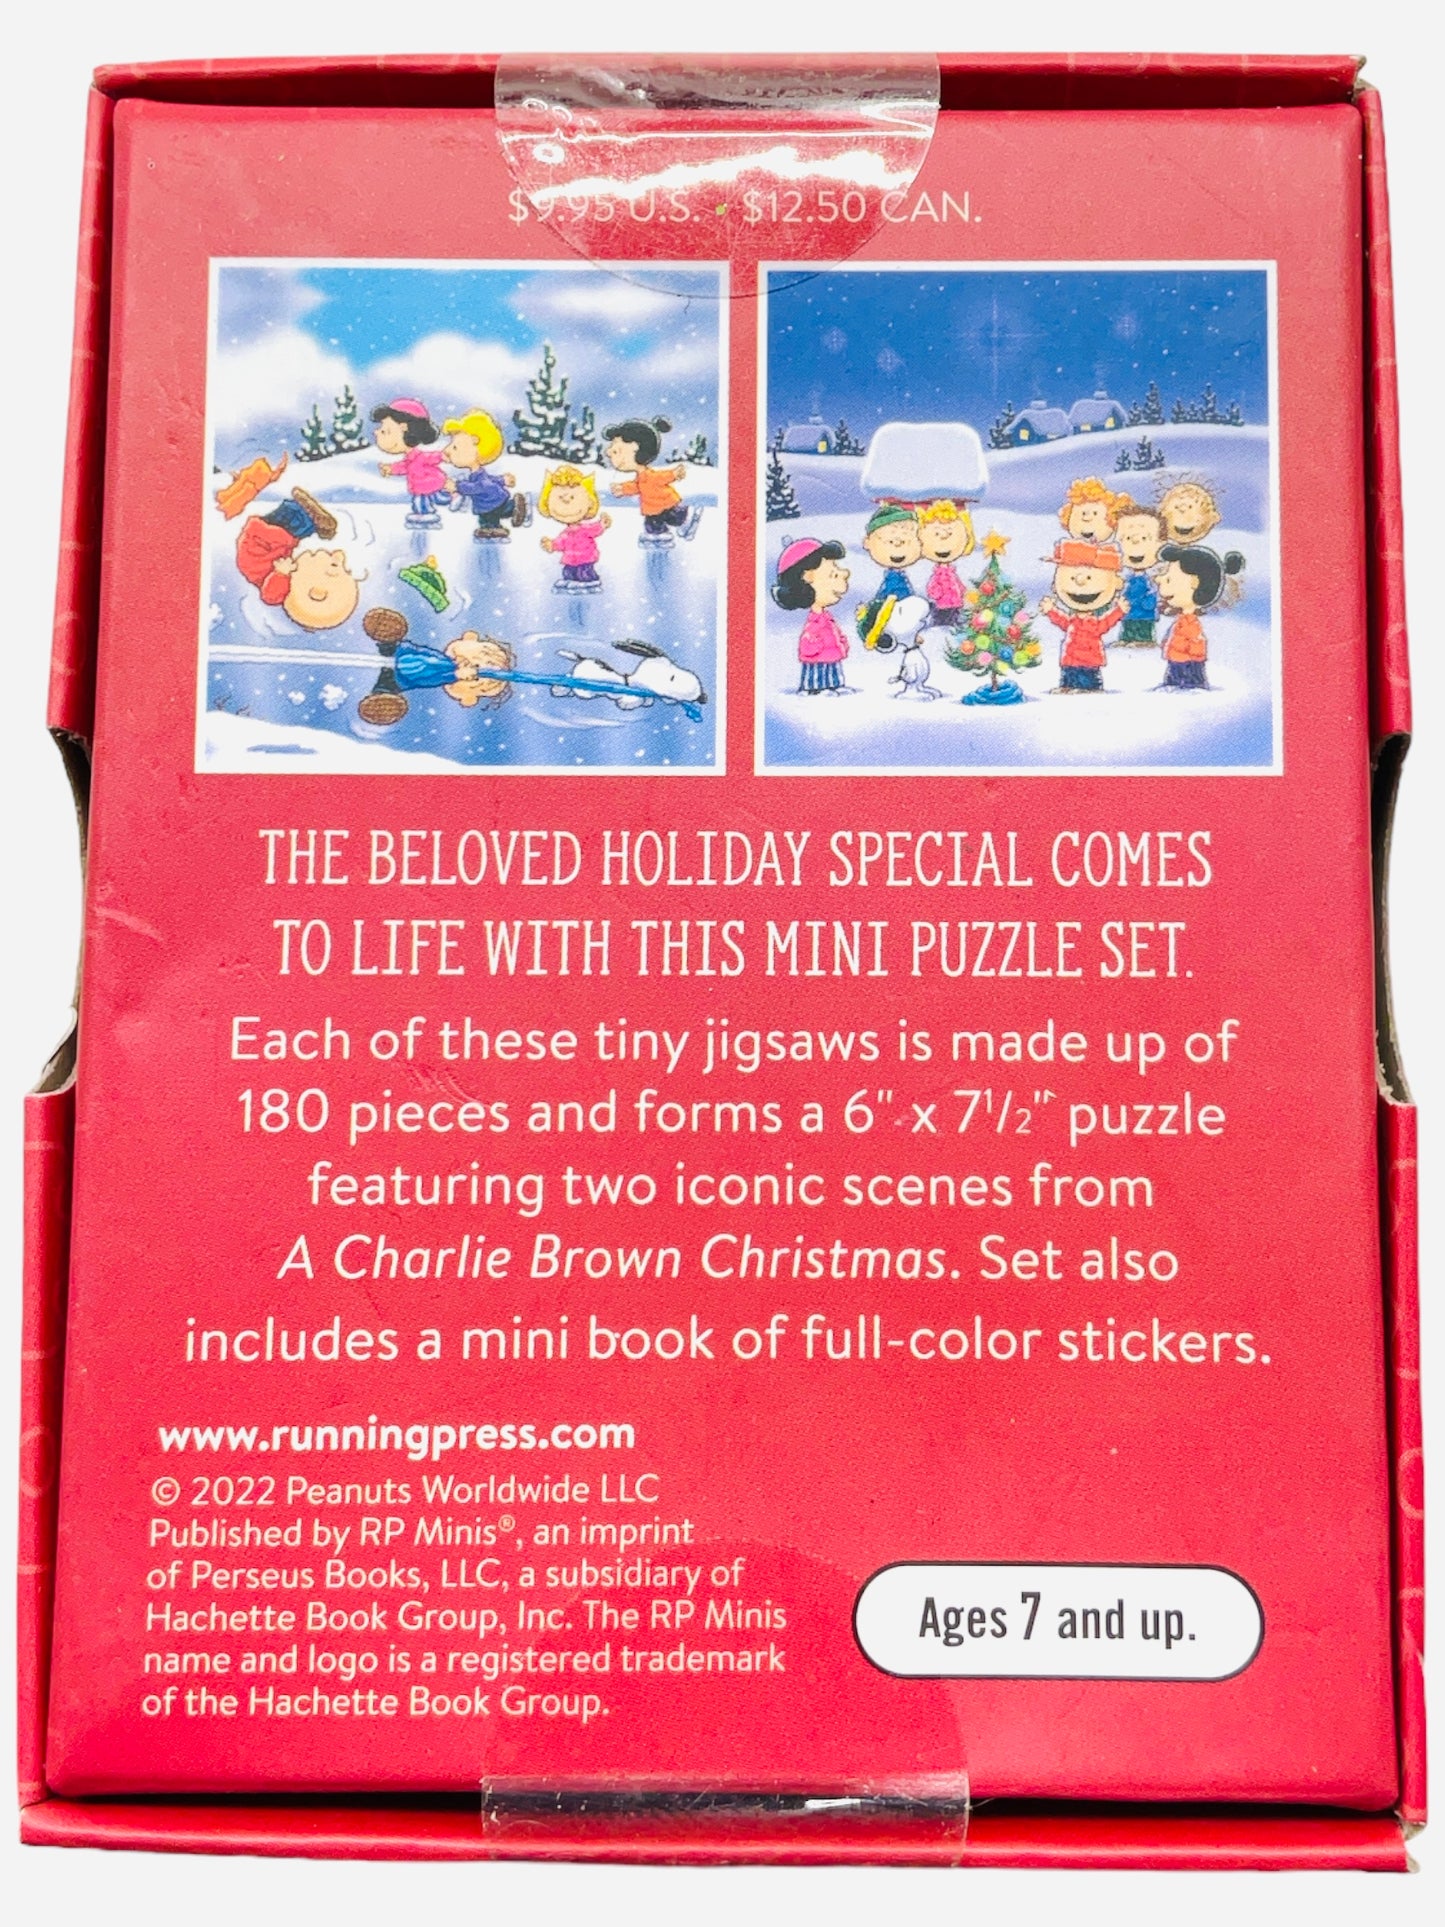 Peanuts A Charlie Brown Christmas Mini Puzzle